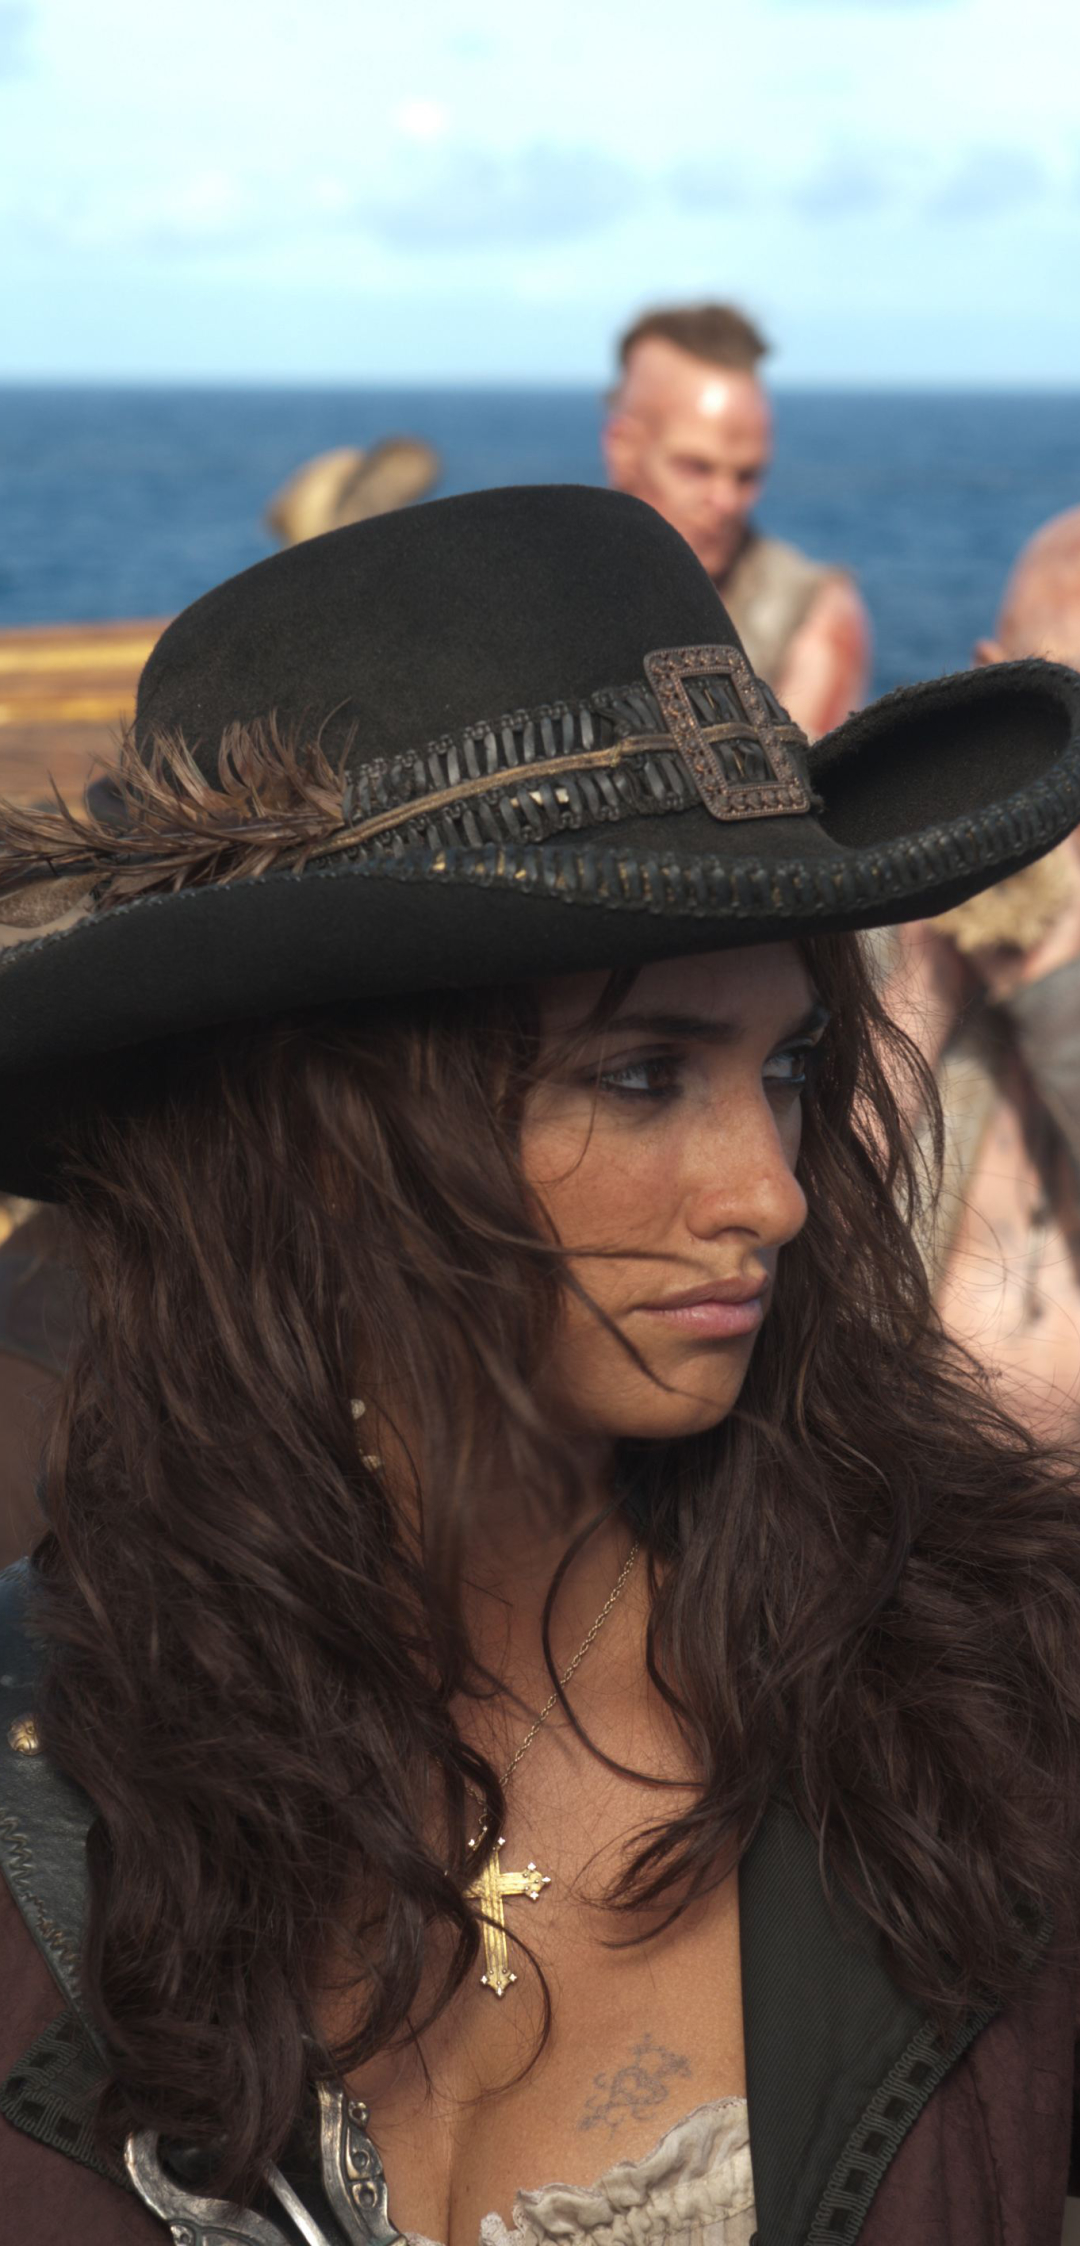 angelica teach, movie, pirates of the caribbean: on stranger tides, penelope cruz, pirates of the caribbean